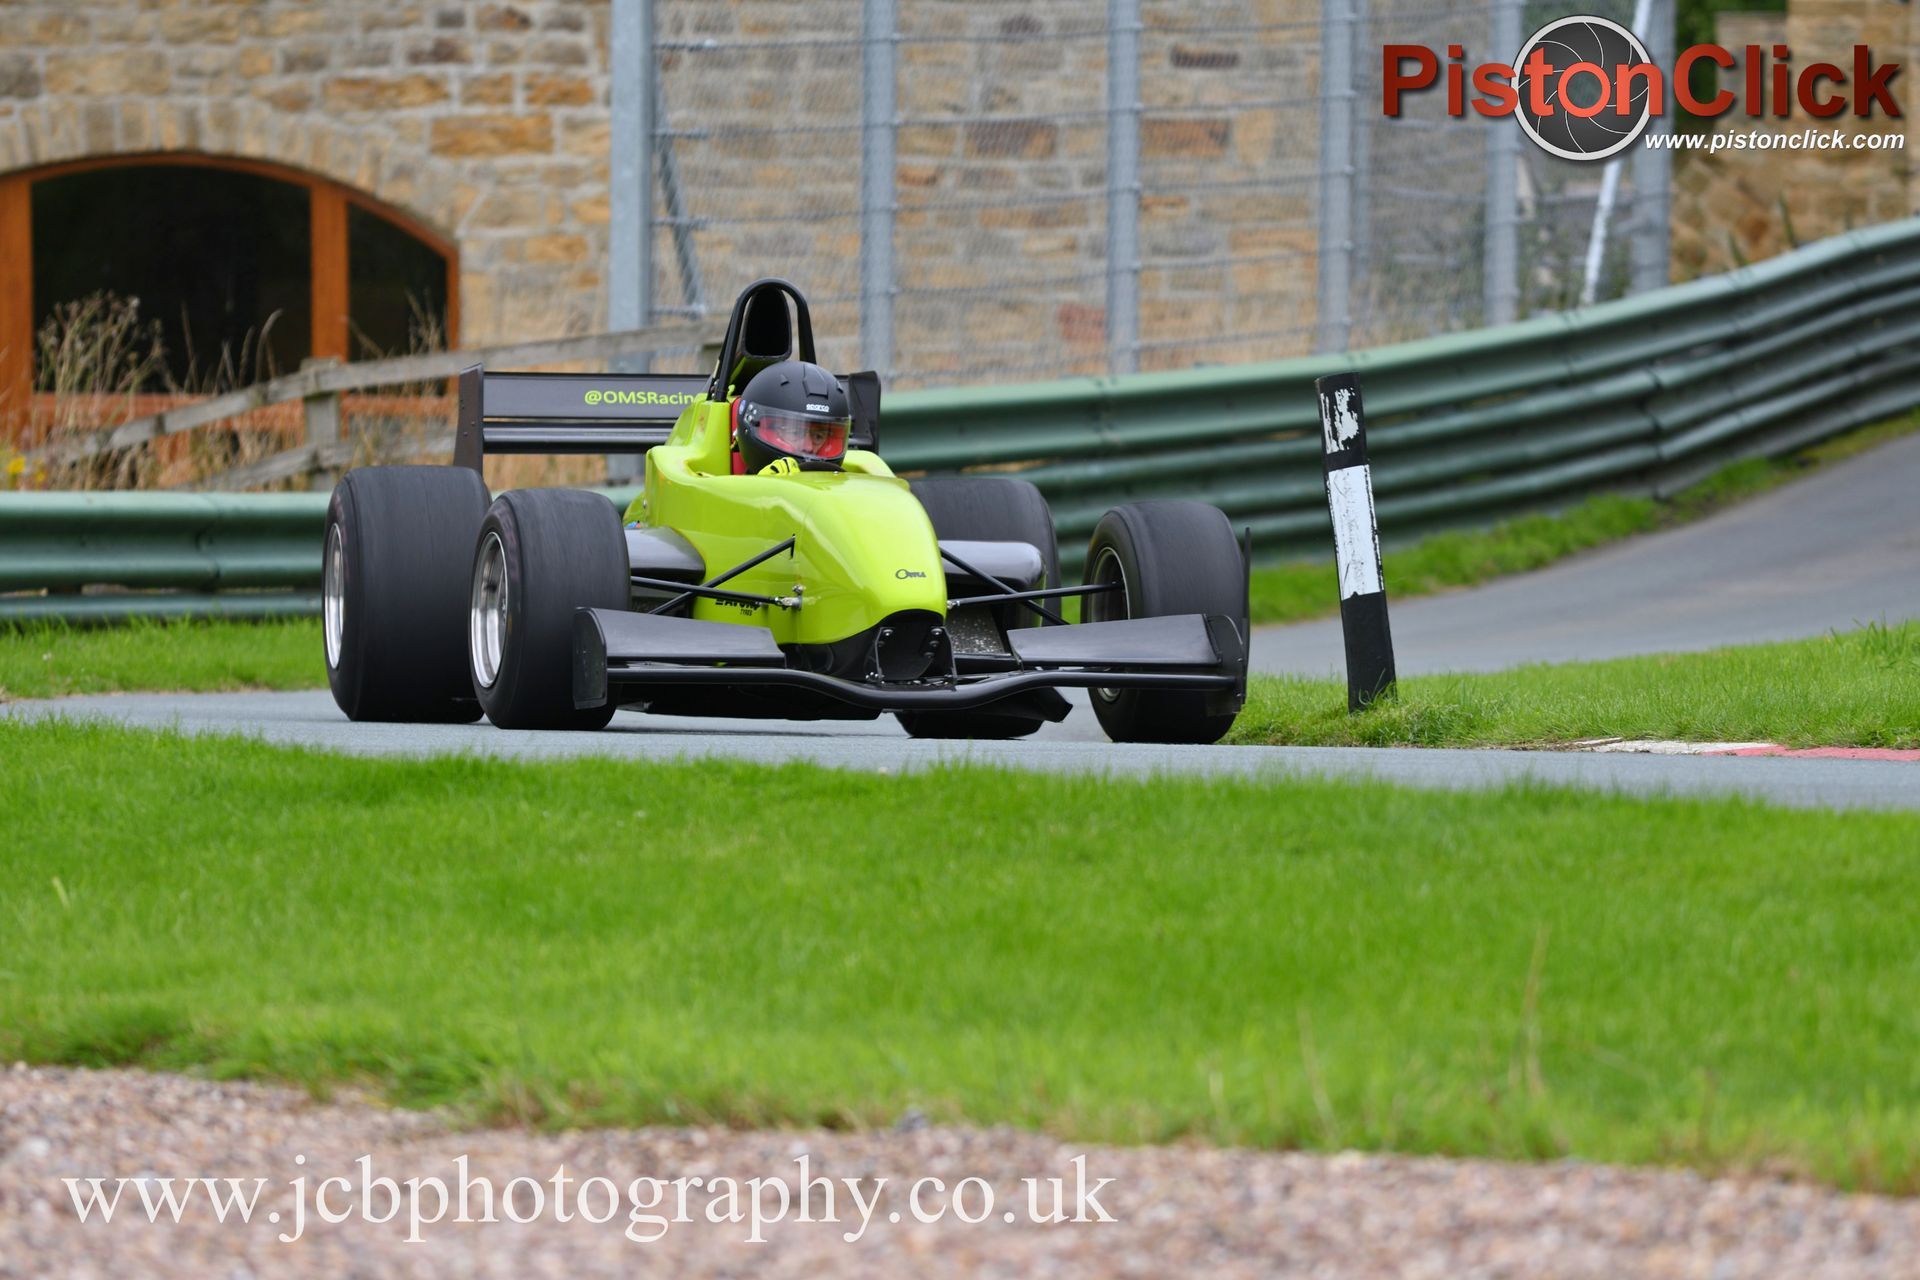 Stephen Owen driving the OMS 28 RPE